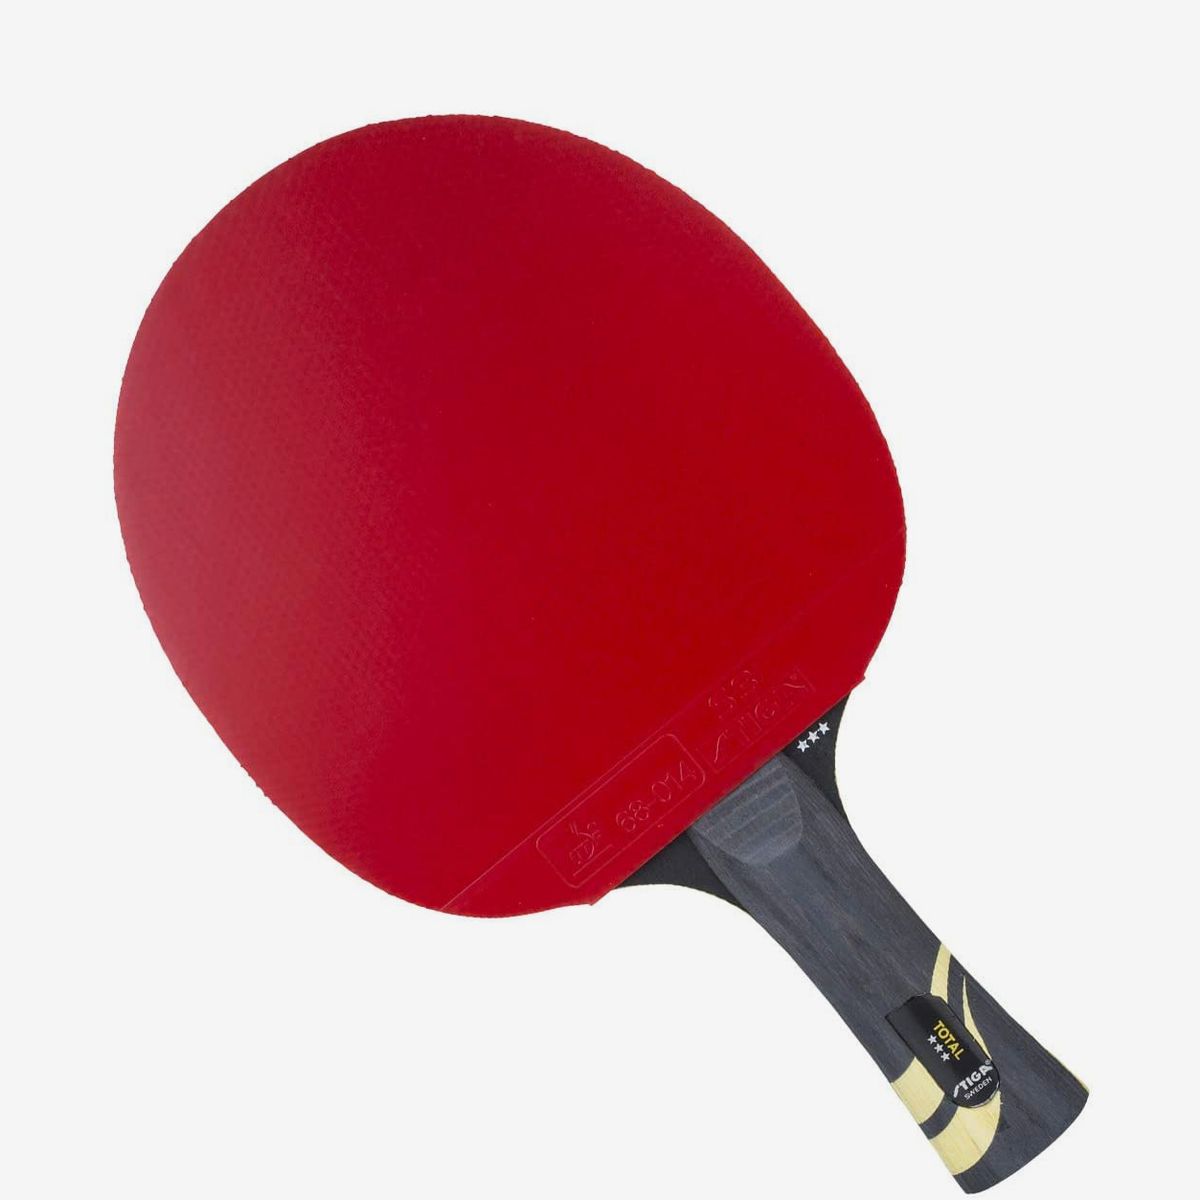 Best Table Tennis Racket Ping Pong Paddle Bat Blade Top Quality Sport Rubber 